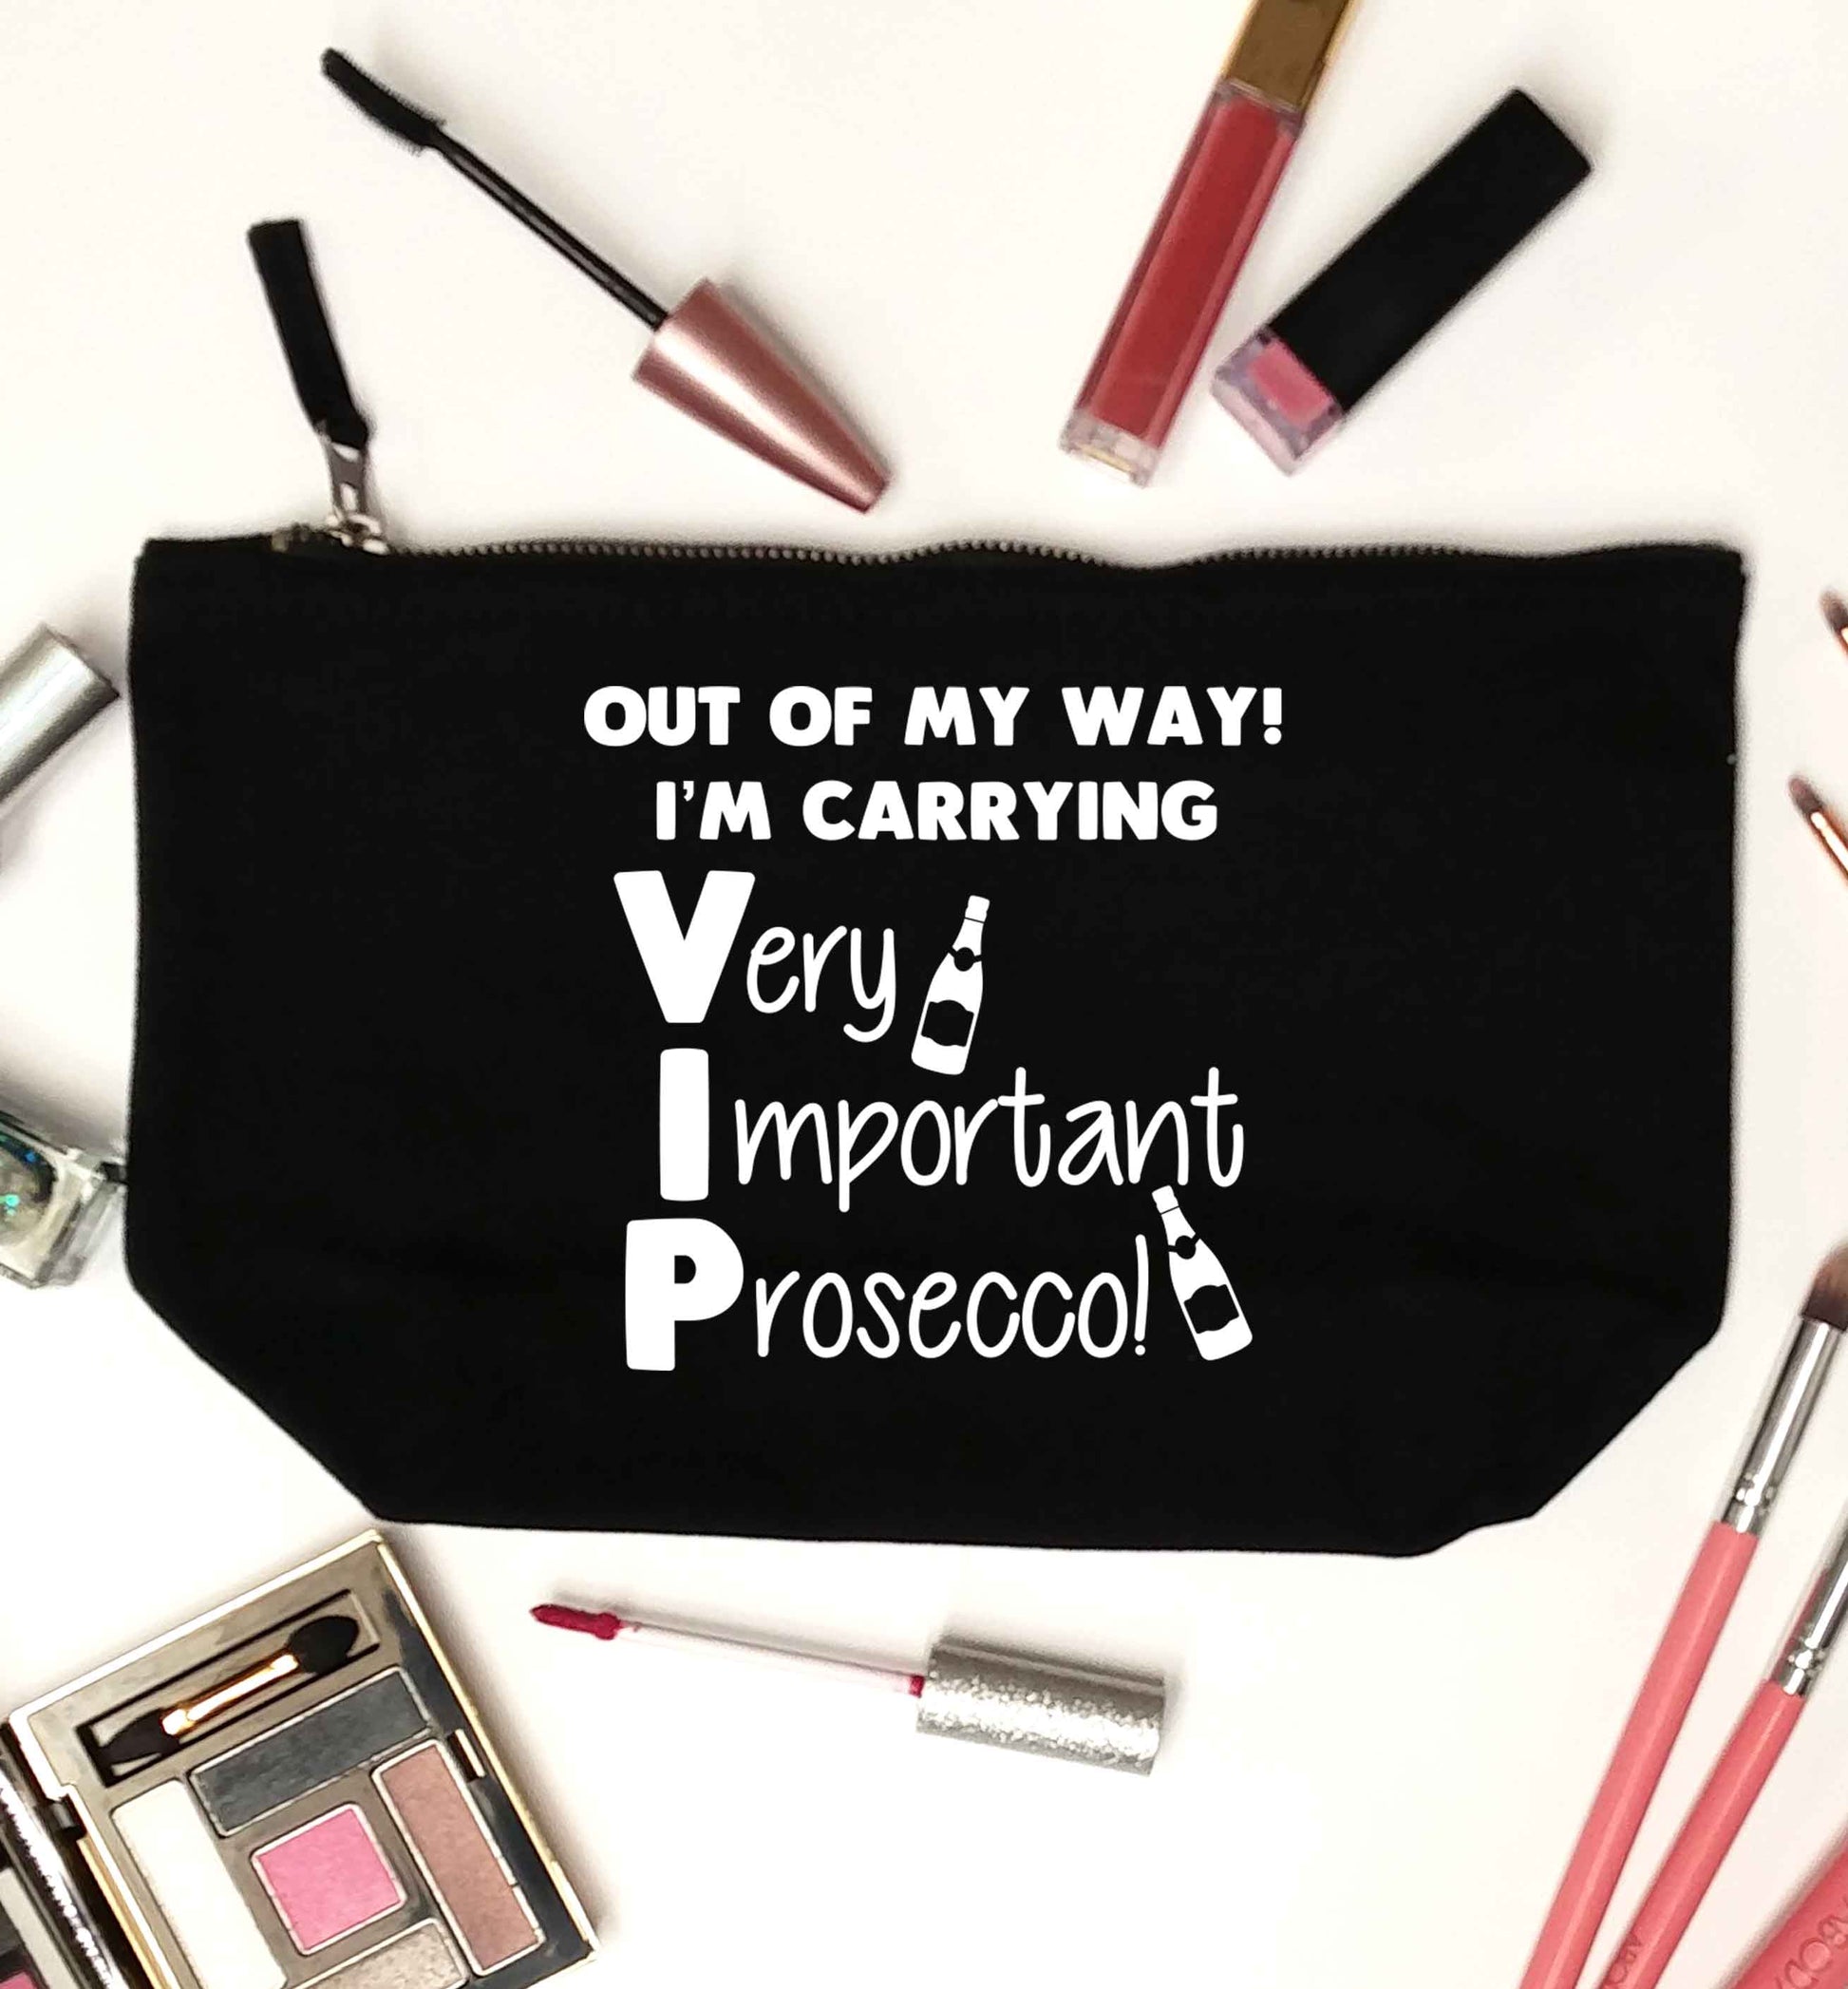 Out of my way I'm carrying very important prosecco! black makeup bag